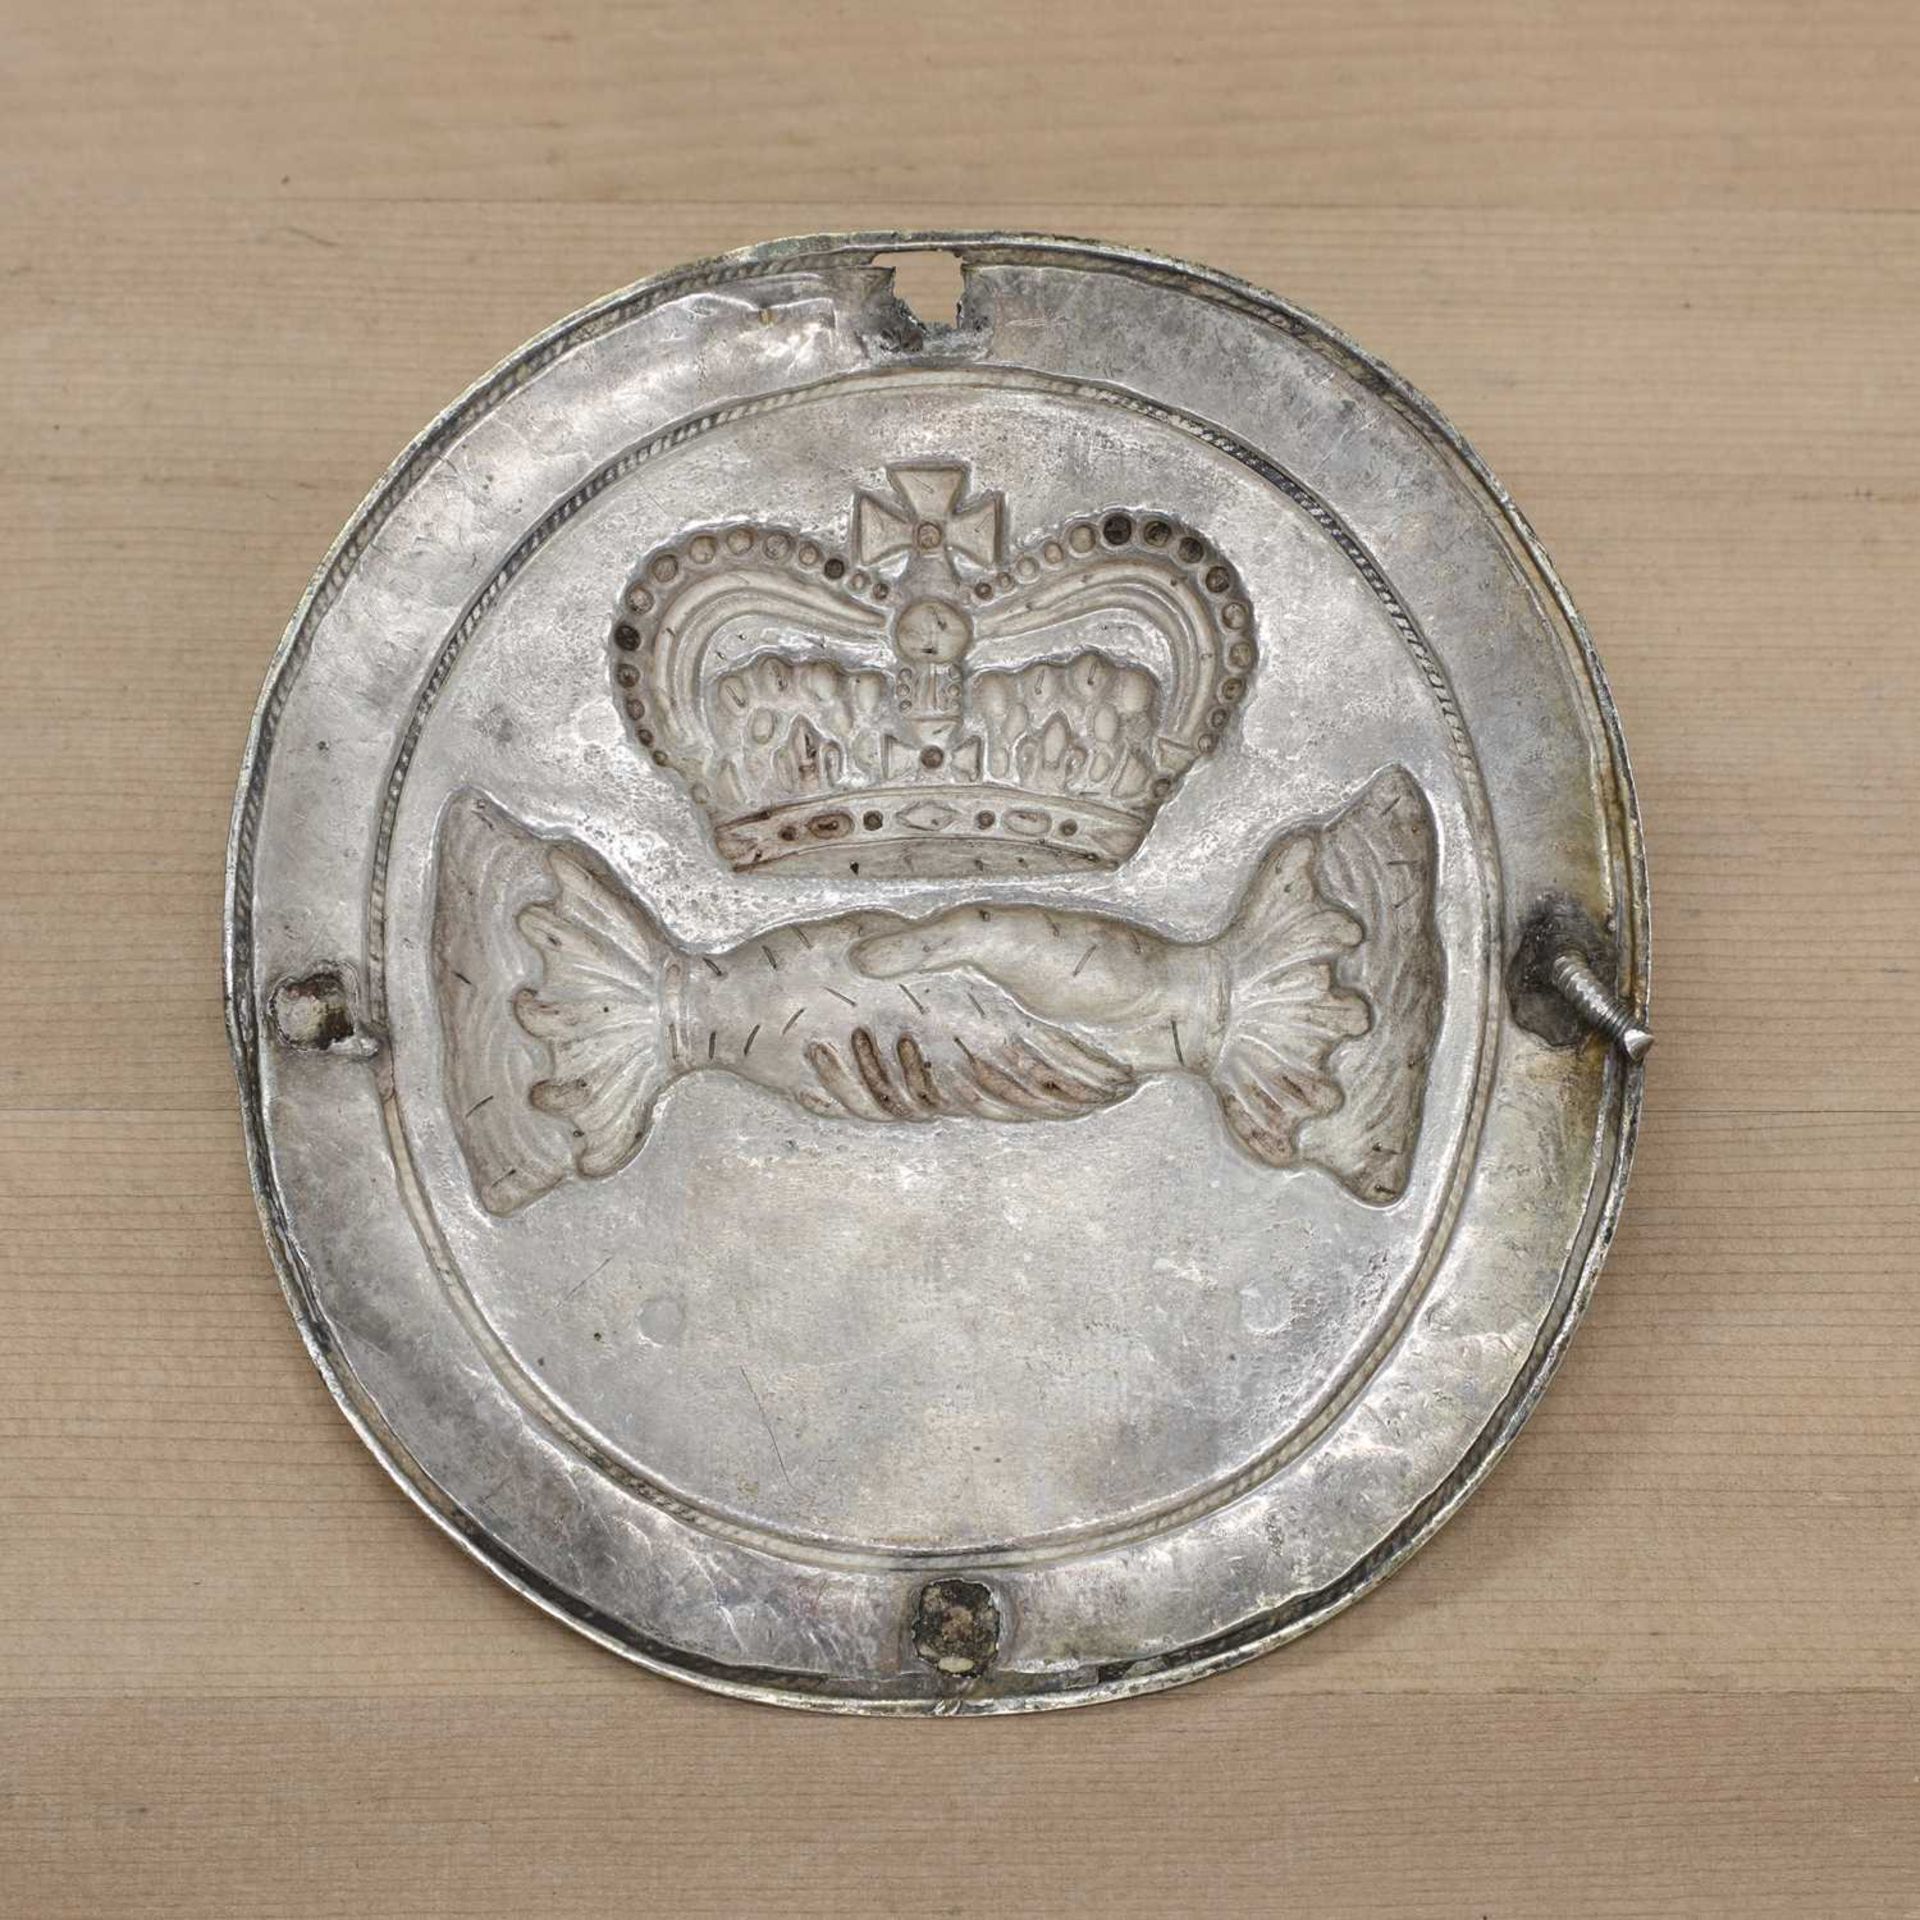 A silver-gilt fire office fireman's badge, - Image 2 of 2